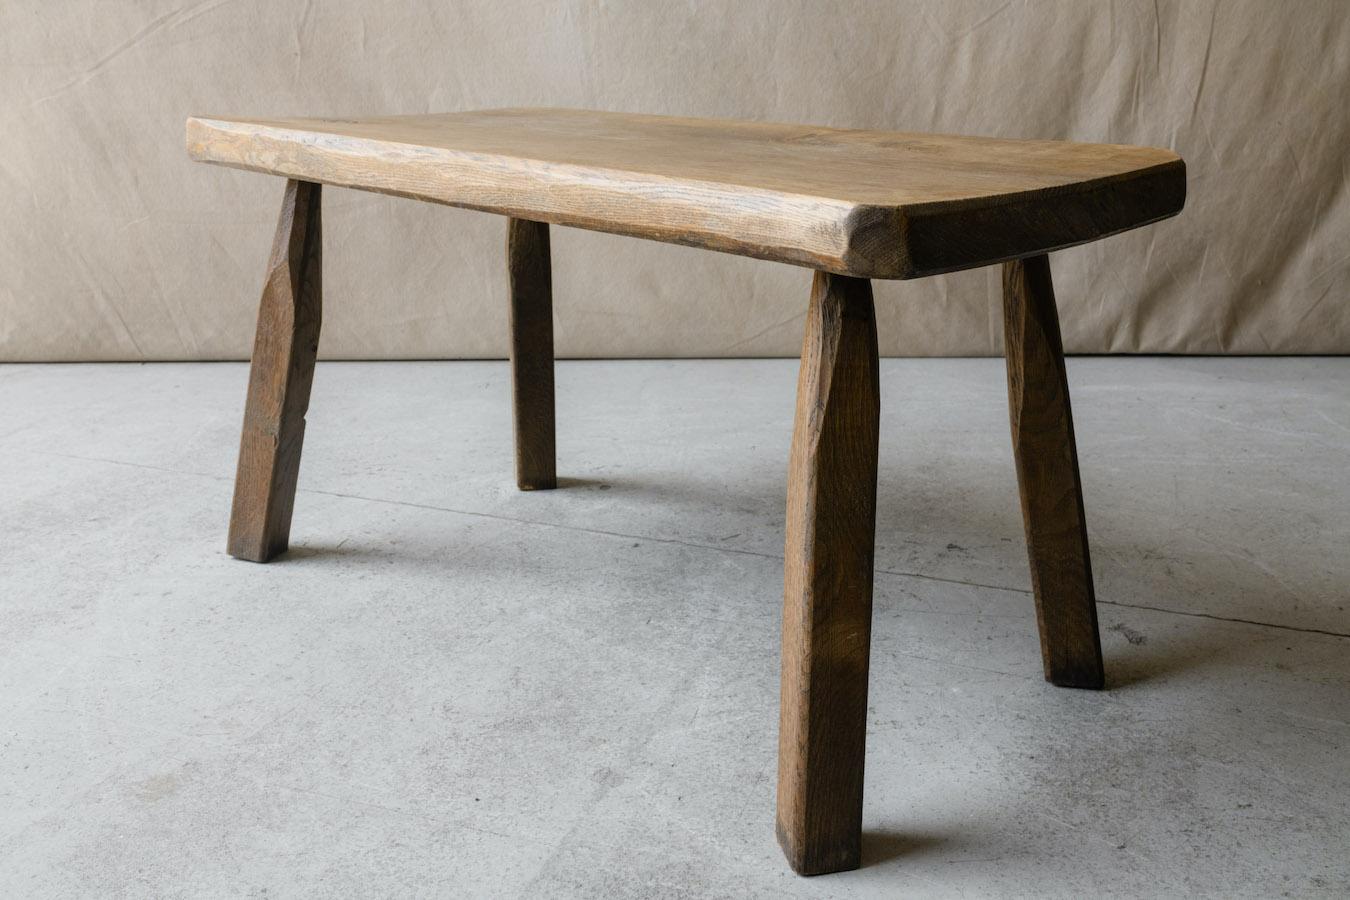 Vintage Walnut Coffee Table From France, Circa 1950 For Sale 1